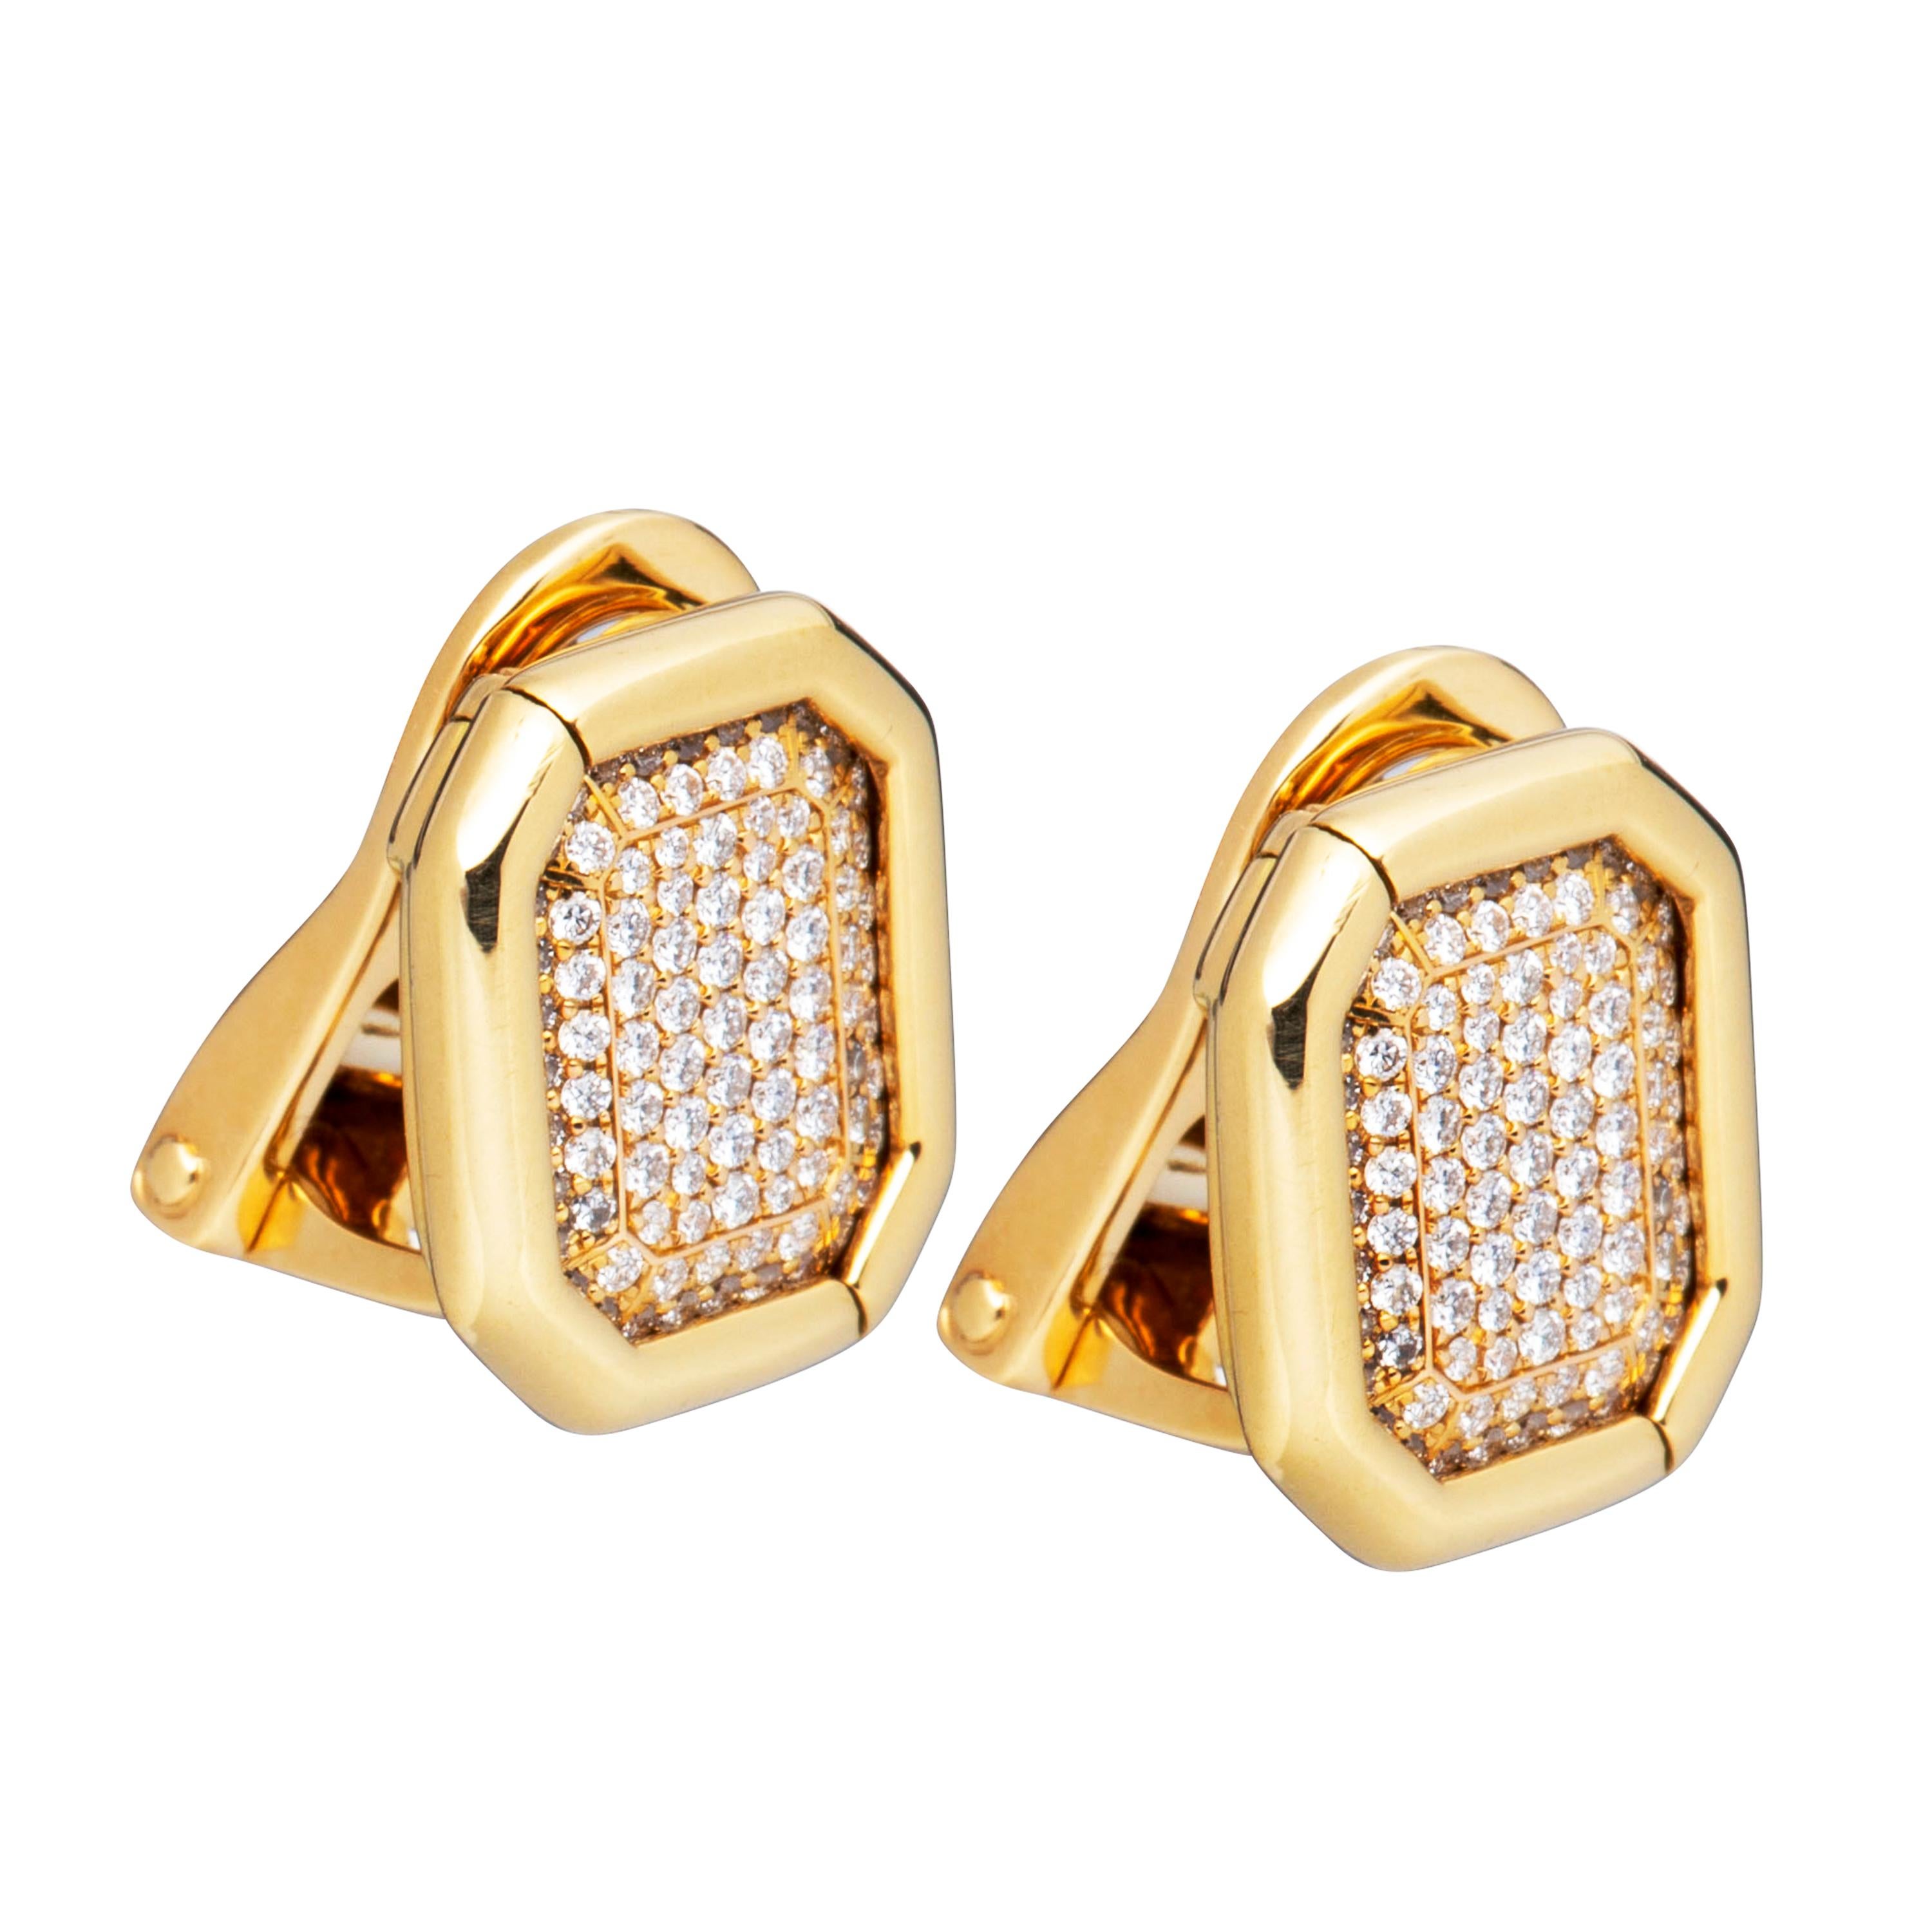 Chopard Yellow Gold Pave Diamond Earrings

Model Number: 84/6014-0001

100% Authentic

Brand New

Comes with original Chopard box, certificate of authenticity and warranty and jewels manual

18 Karat Yellow Gold Titan Treated Earrings (9.3gr)

186